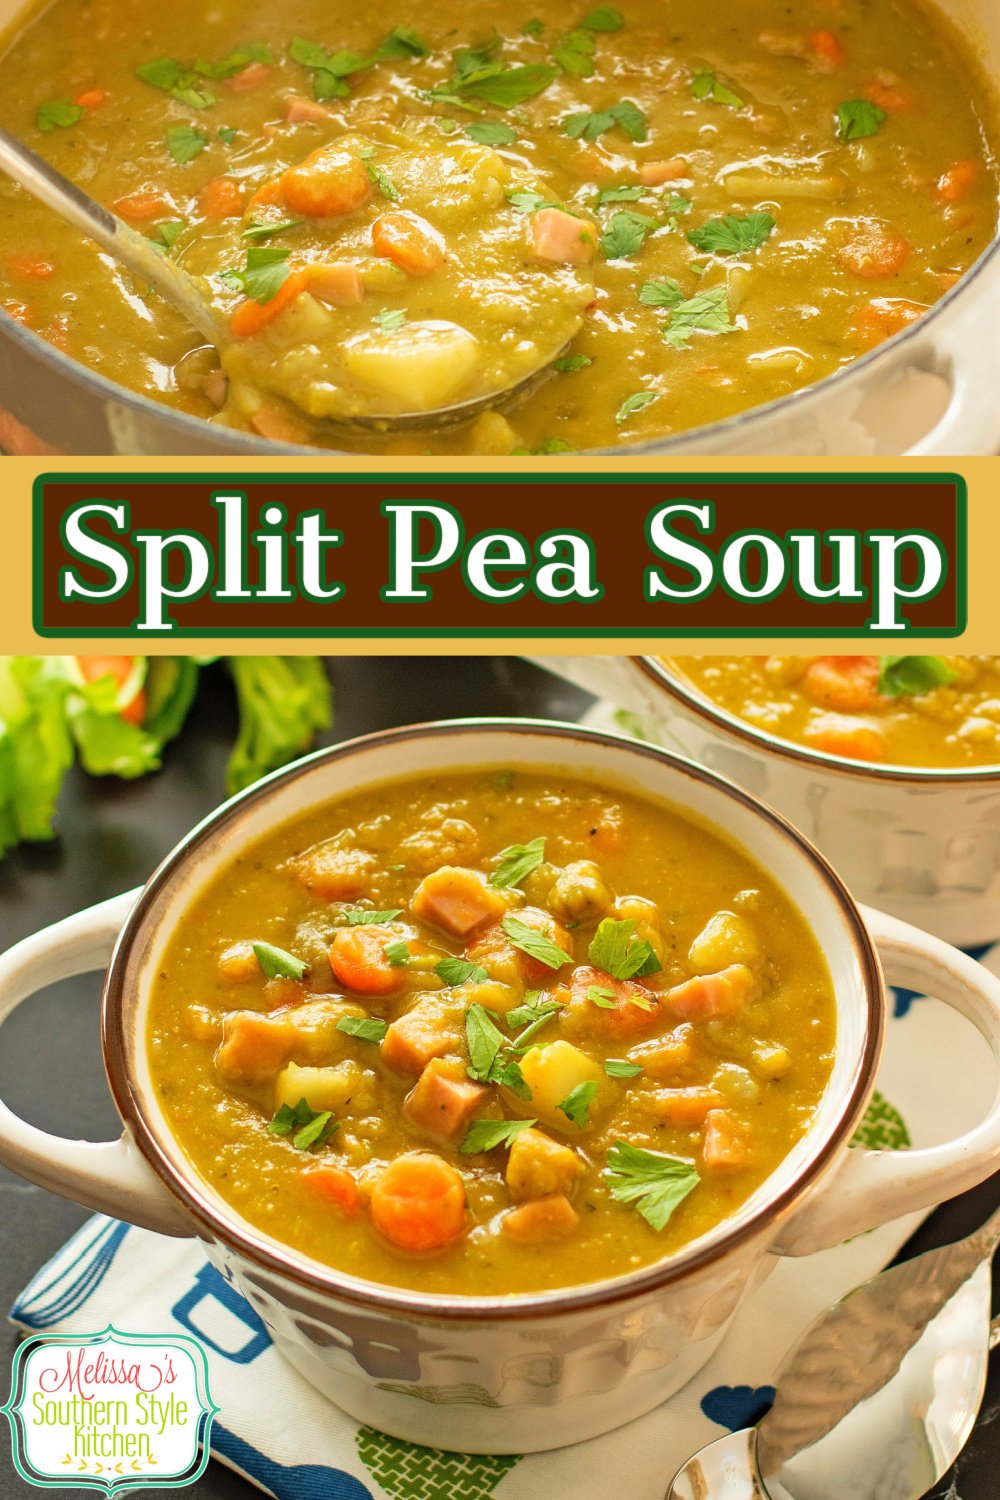 This recipe for Split Pea Soup is delicious served with a side of bread for dipping in the flavor packed broth #splitpeasoup #splitpeas #splitpearecipe #souprecipes #easysouprecipe #greensplitpeasoup #peasoup via @melissasssk